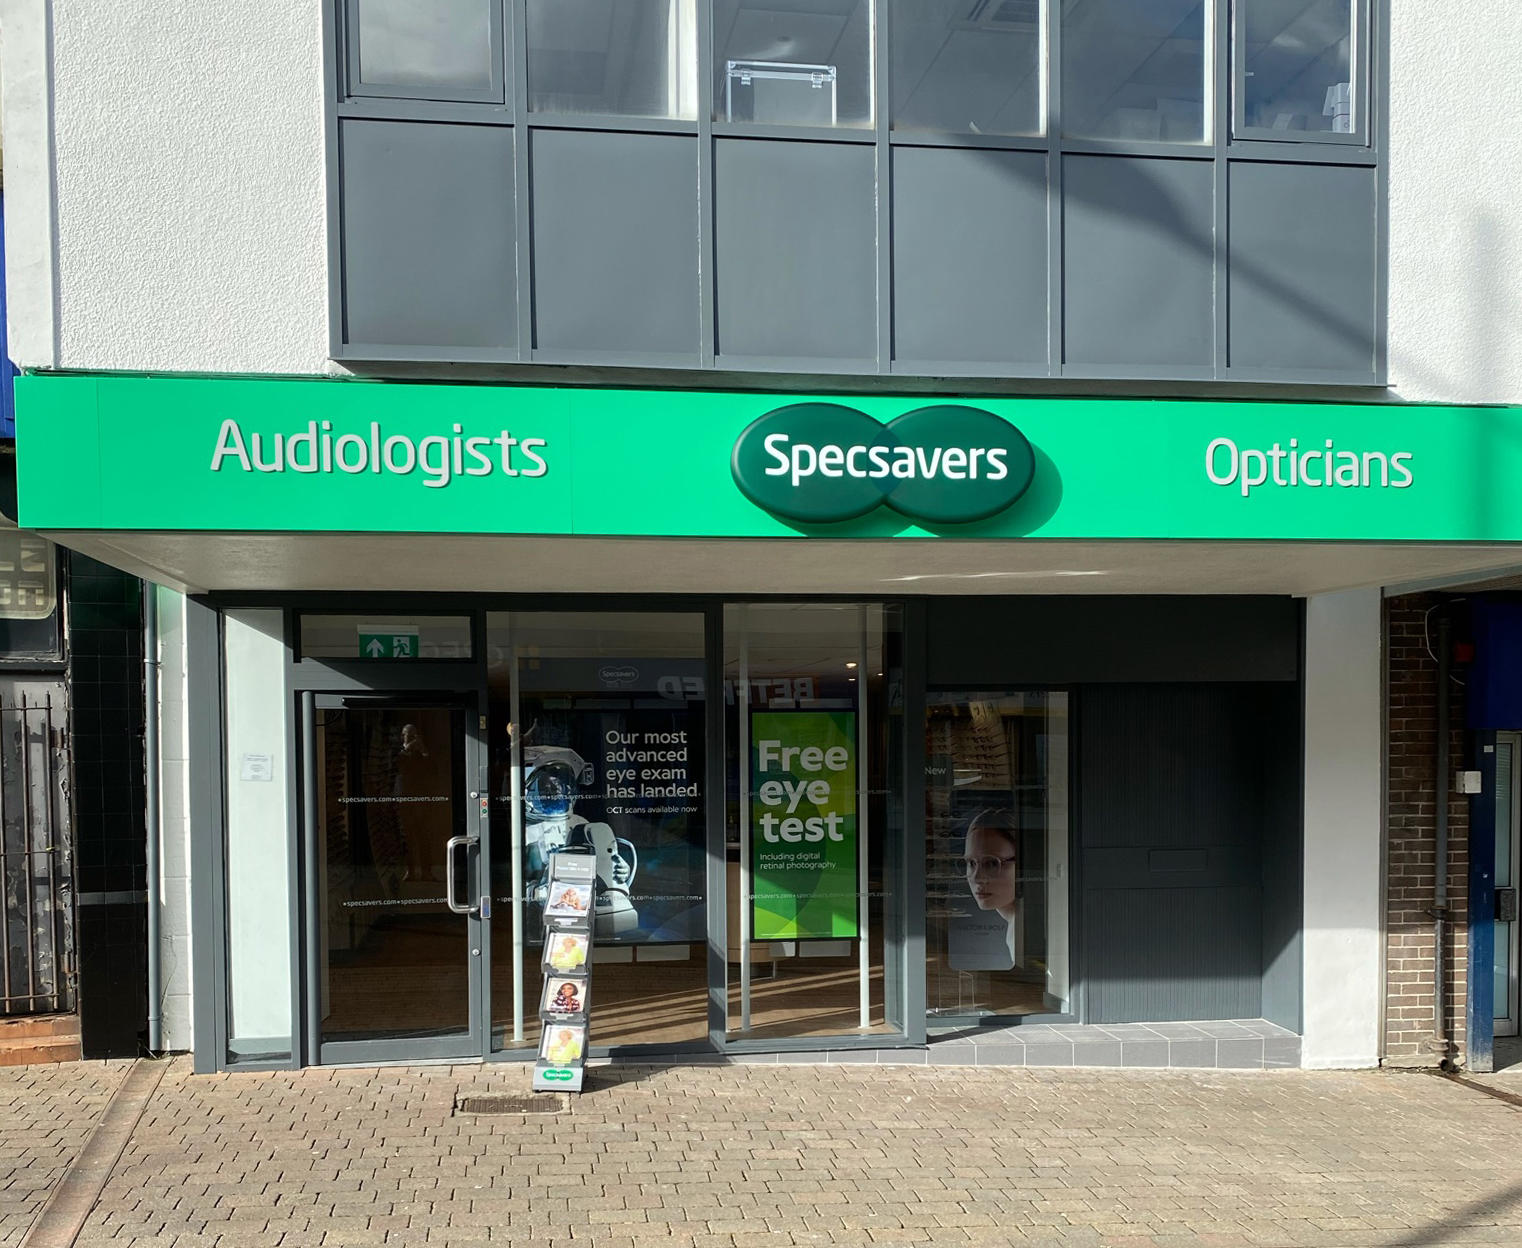 Images Specsavers Opticians and Audiologists - Stanley